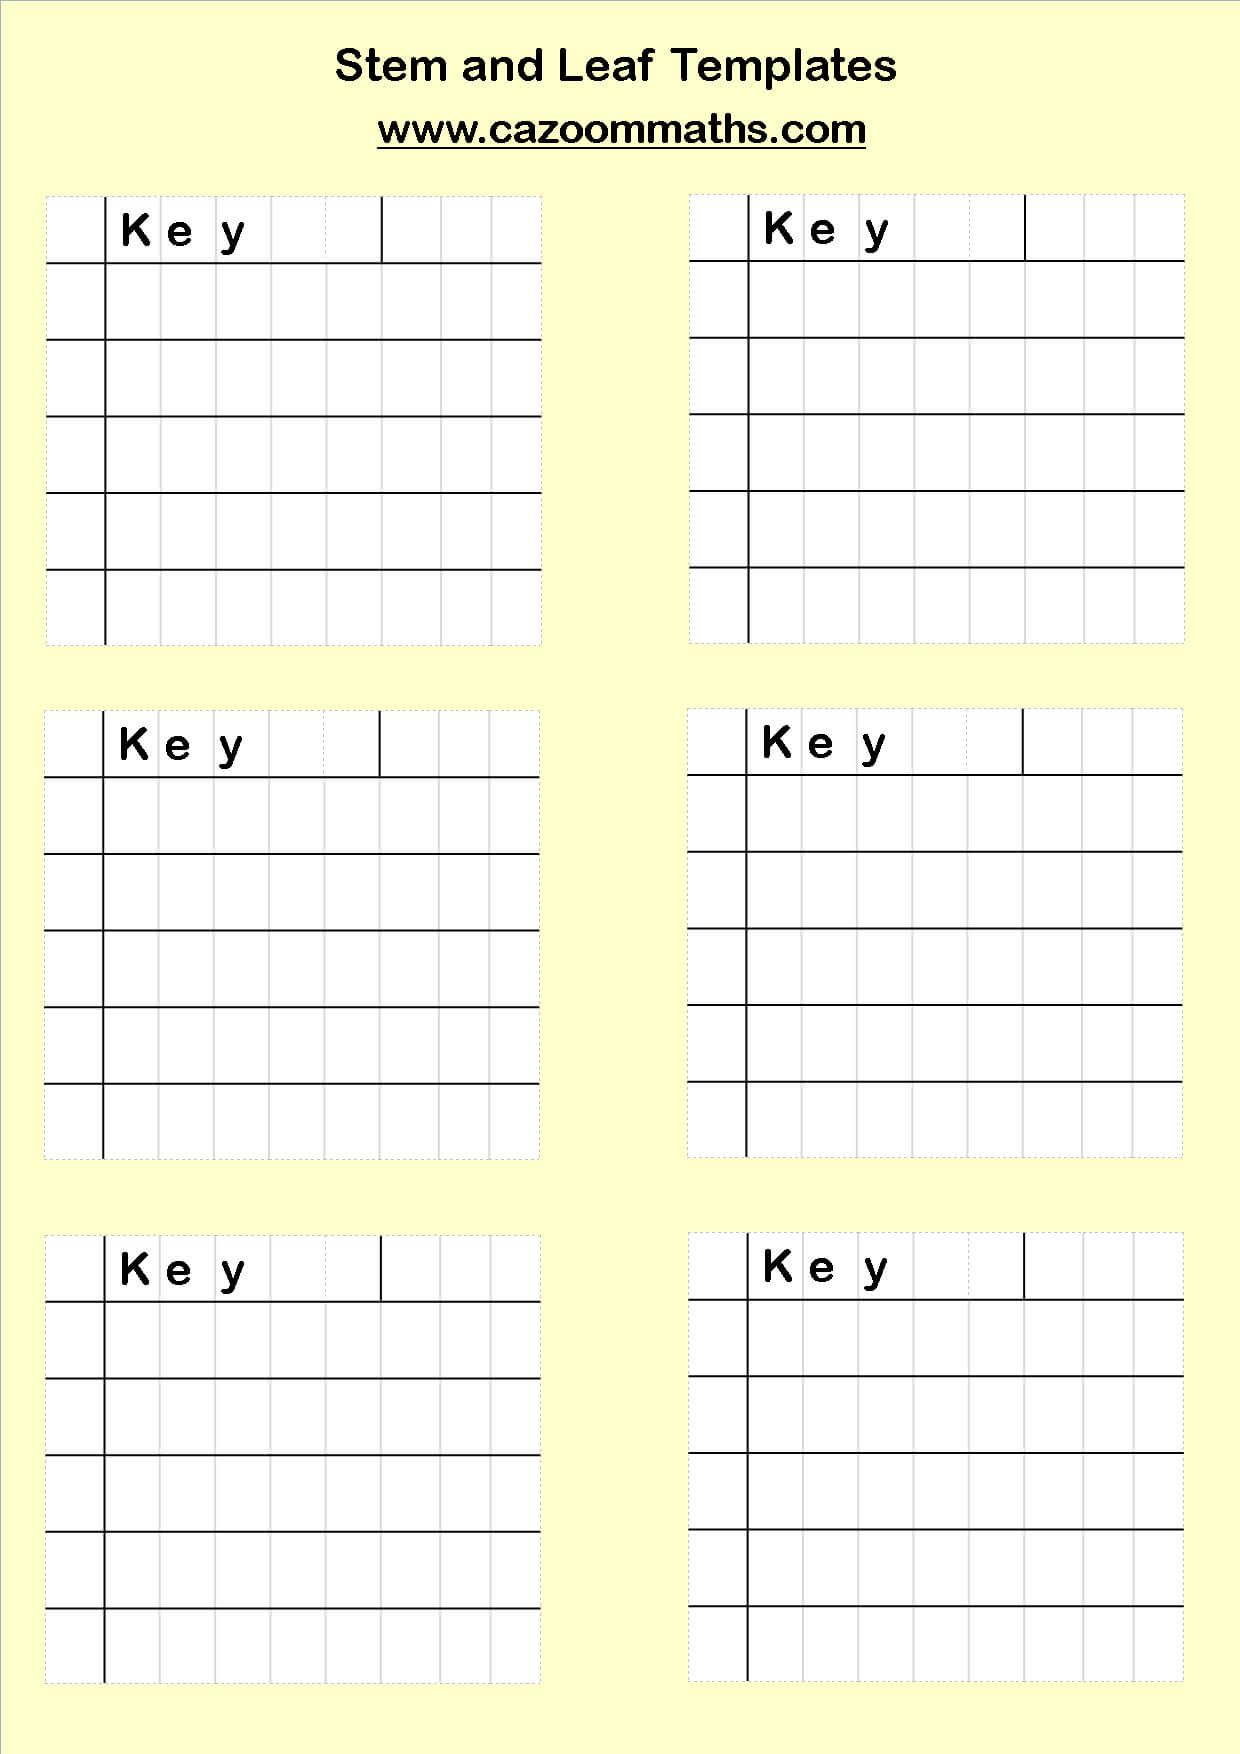 Stem And Leaf Diagrams Templates | Cazoom Maths Worksheets Intended For Blank Stem And Leaf Plot Template